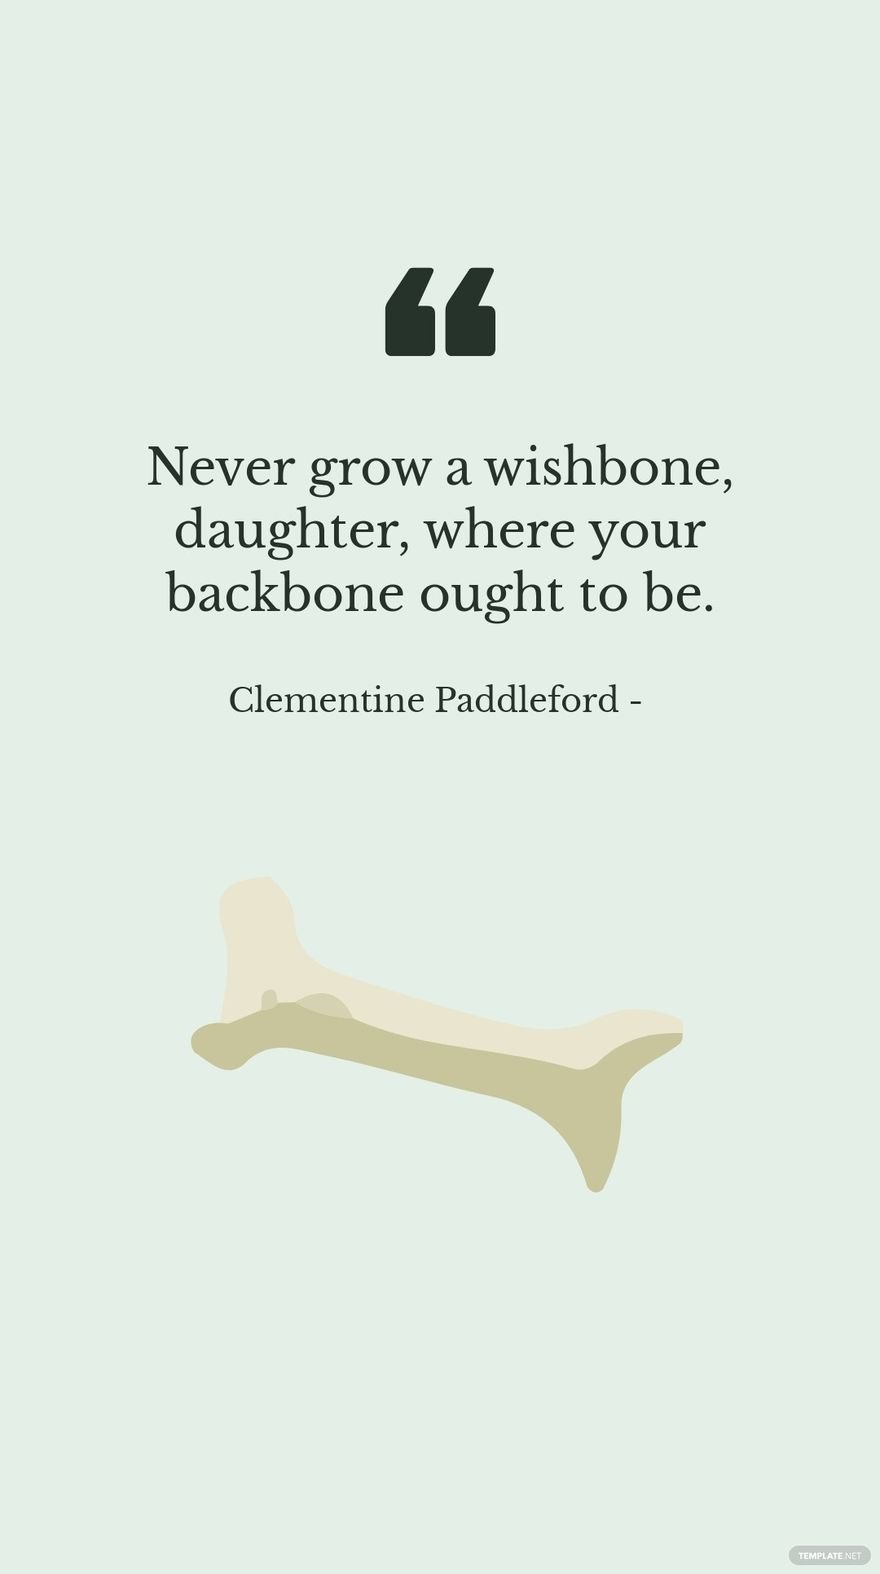 Clementine Paddleford - Never grow a wishbone, daughter, where your backbone ought to be.